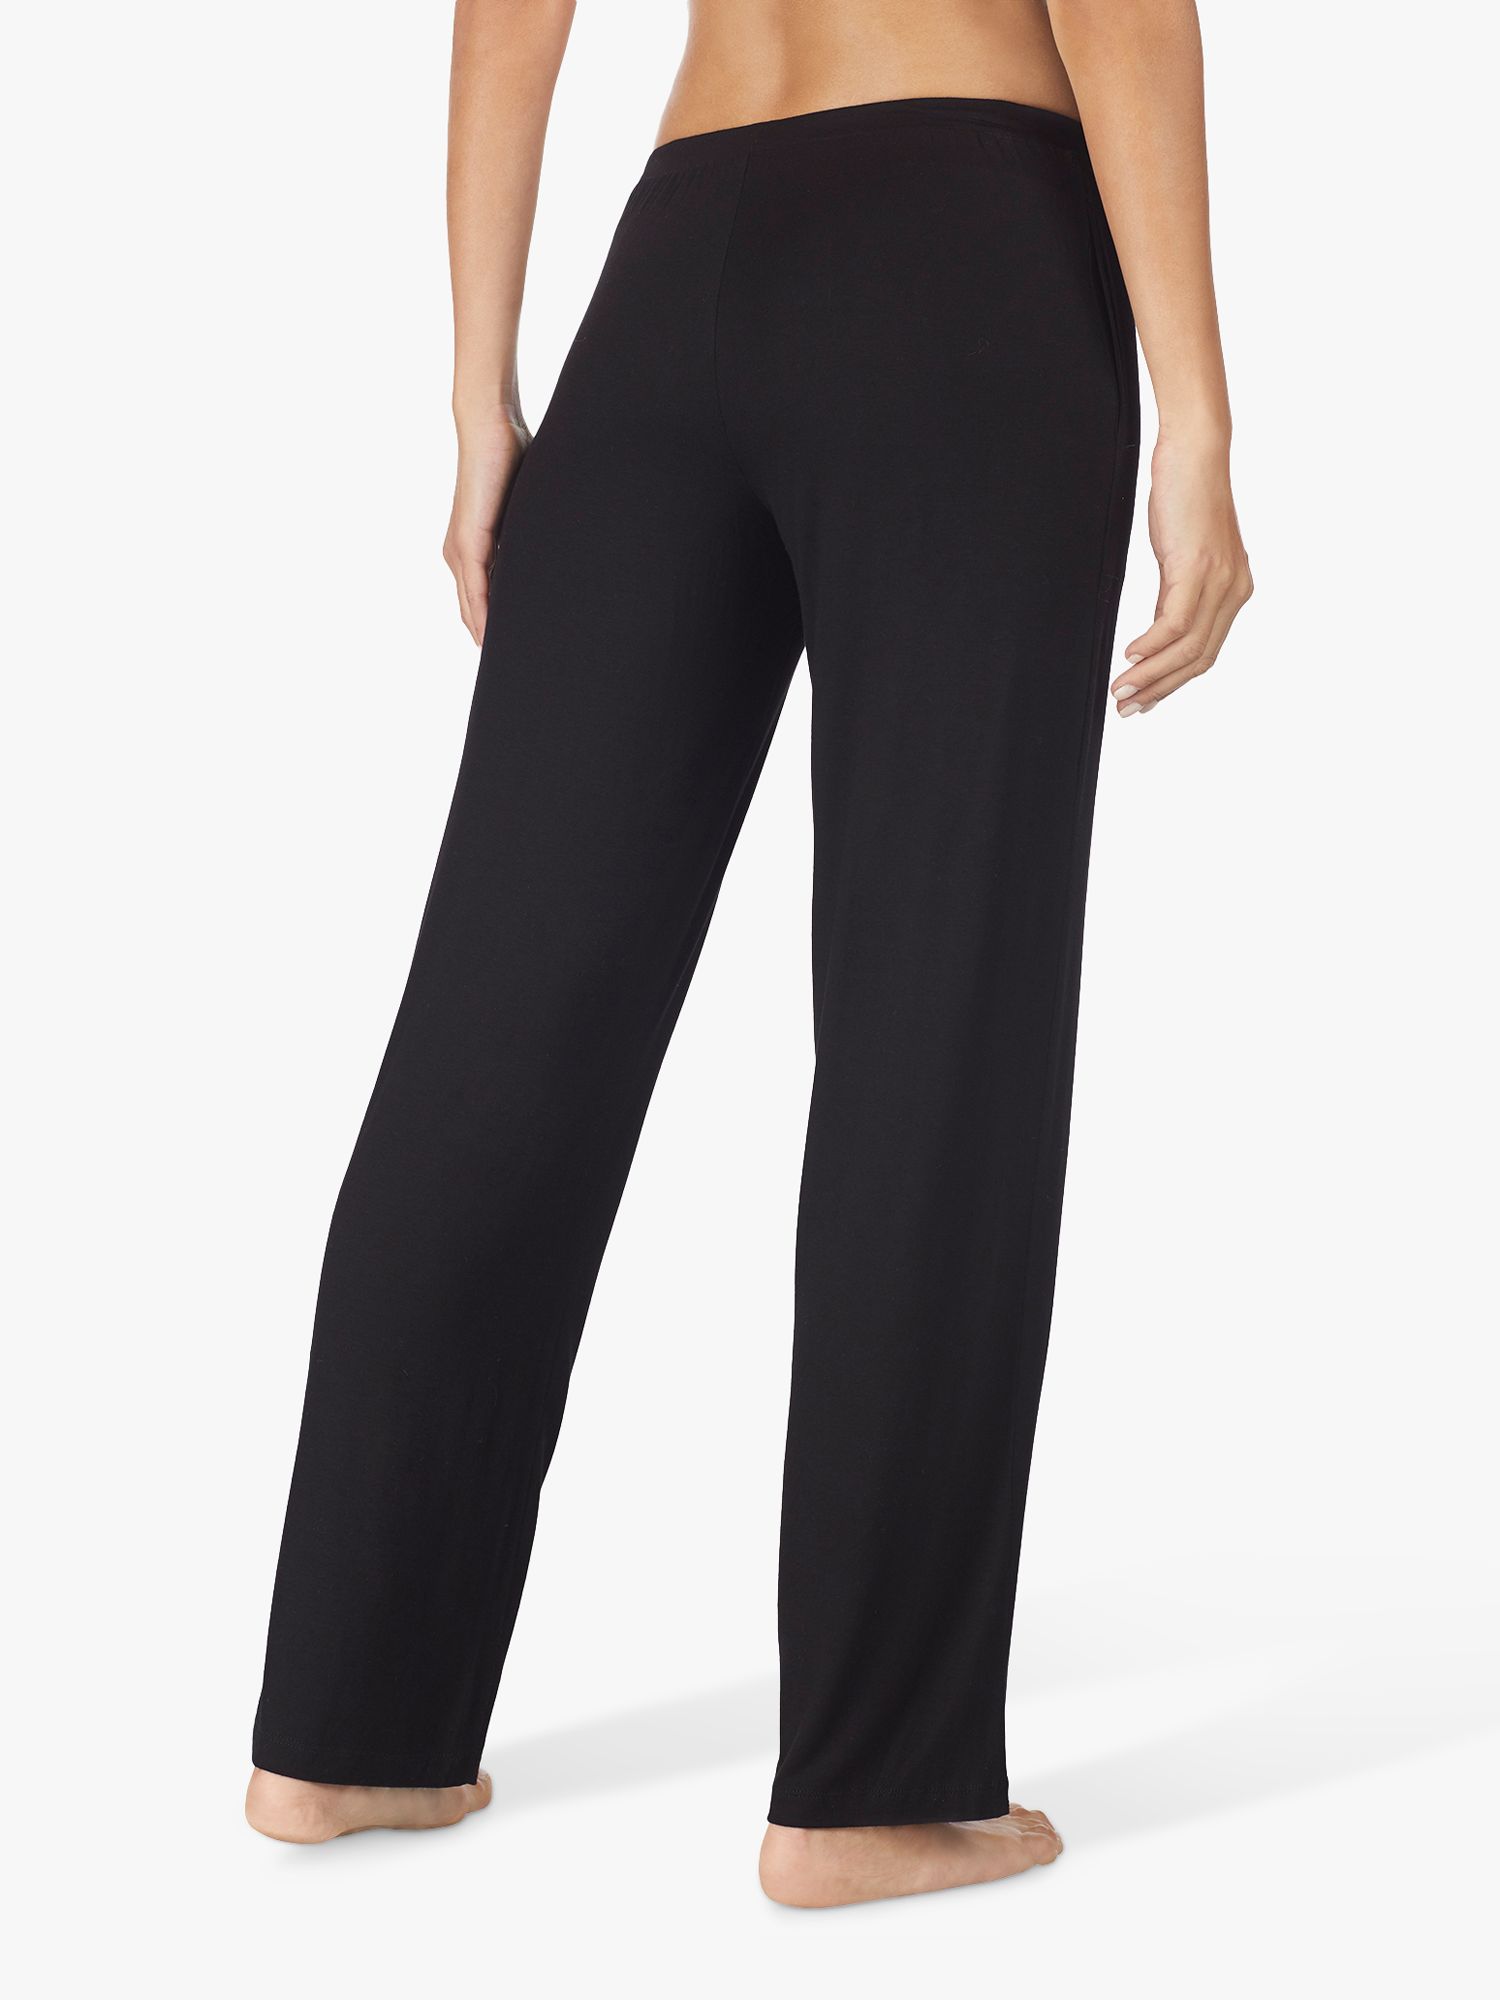 DKNY Core Essential Lounge Bottoms, Black at John Lewis & Partners